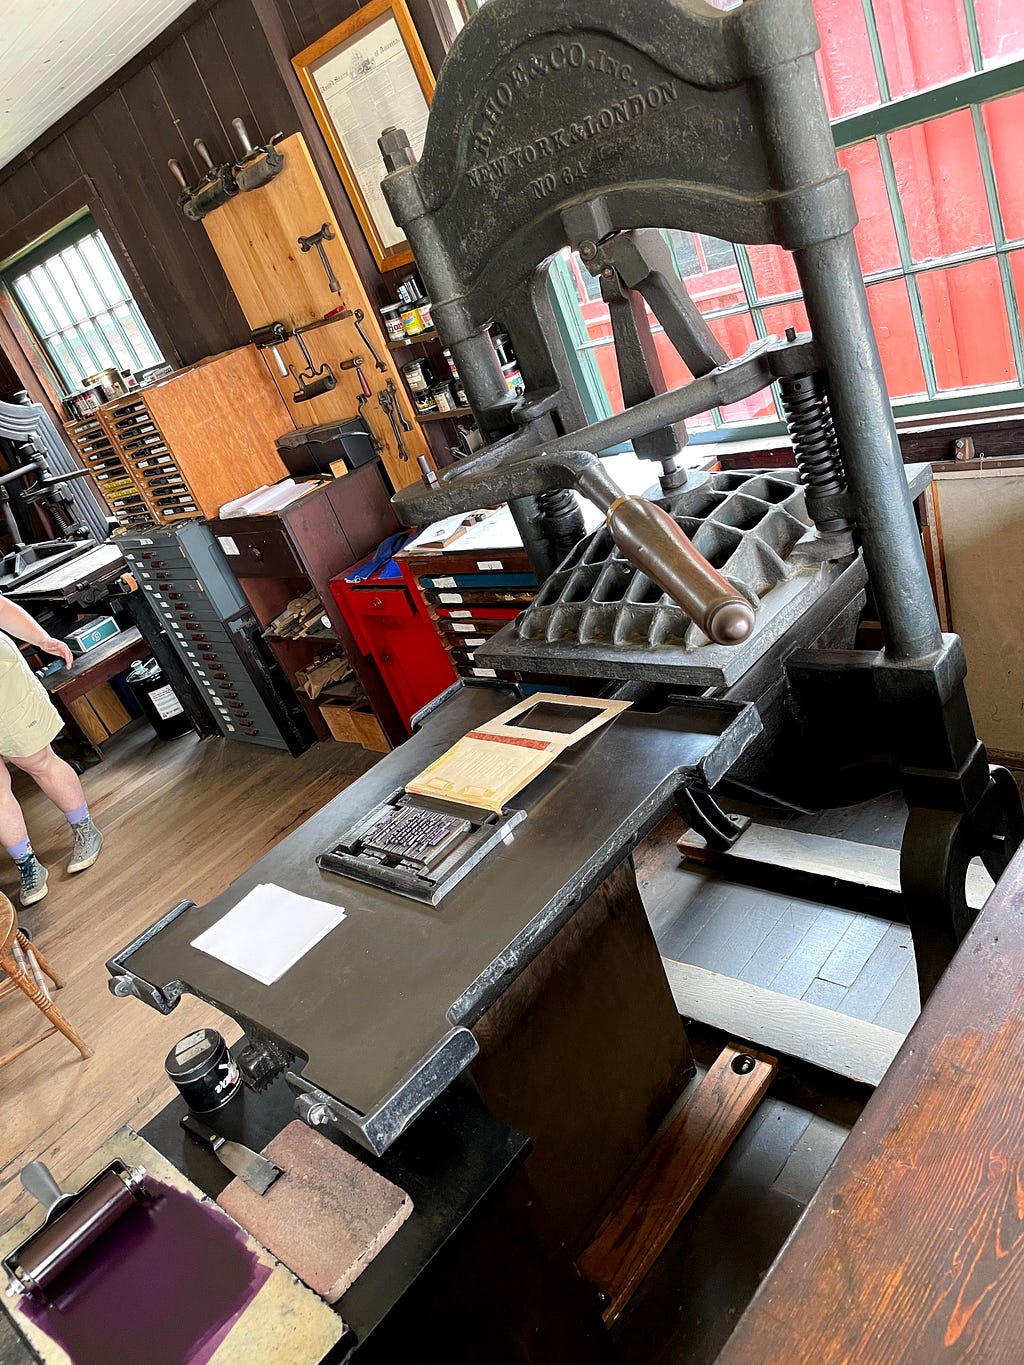 The Washington press with movable tray, movable type, sample pages, and a stamper.